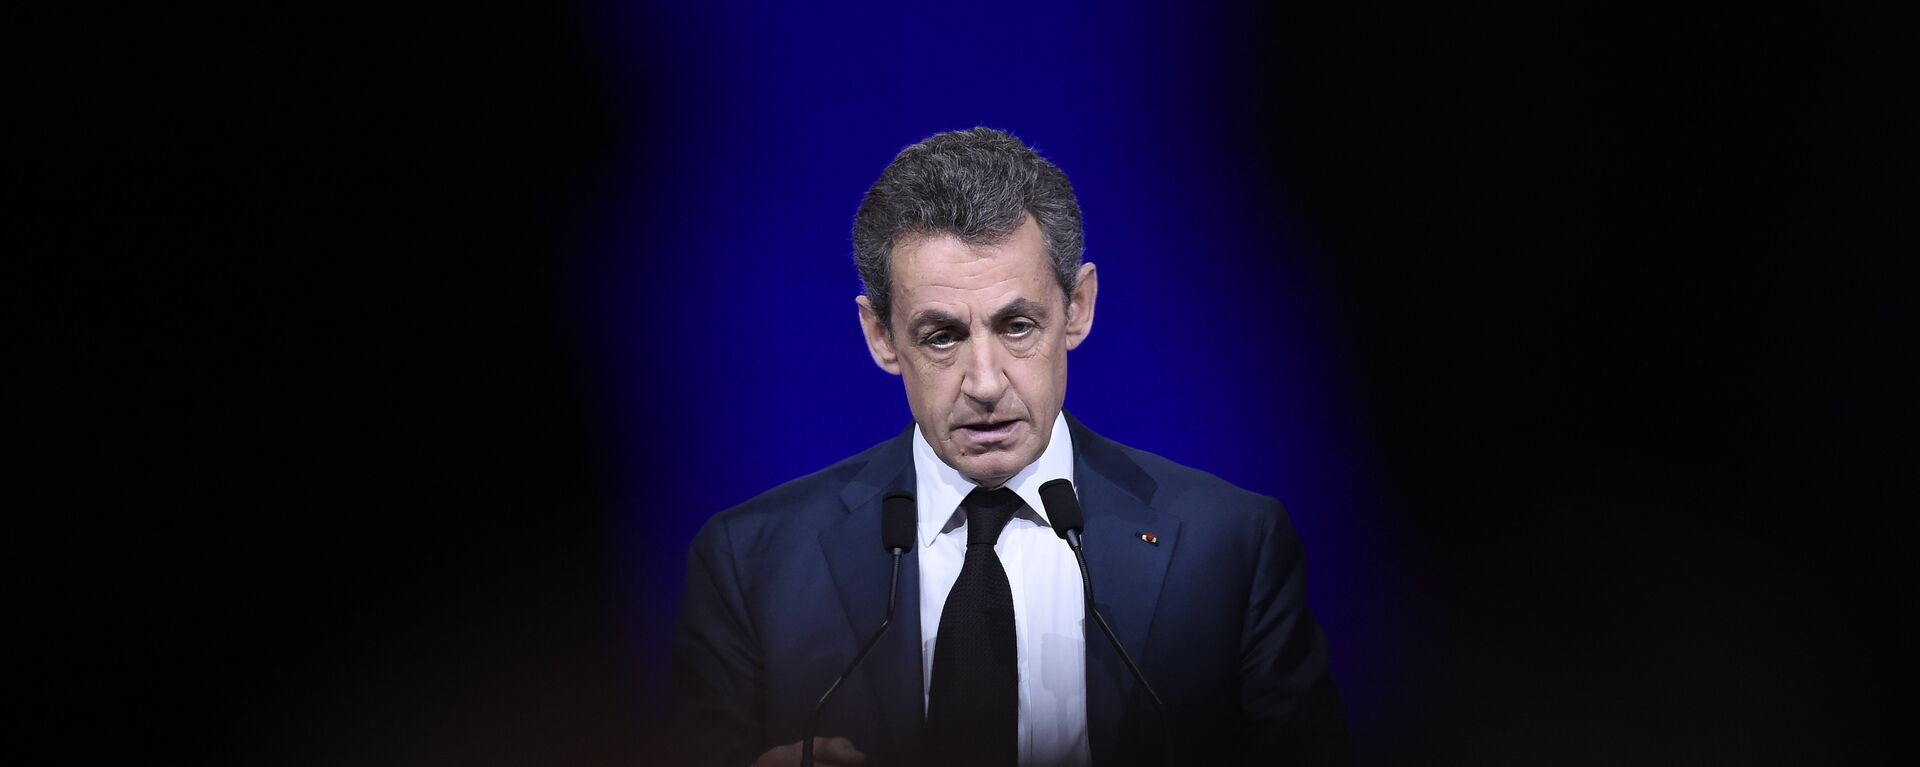 French right-wing Les Republicains (LR) party President, Nicolas Sarkozy delivers a speech during the LR National Council on February 14, 2016 in Paris. - Sputnik Mundo, 1920, 17.05.2023